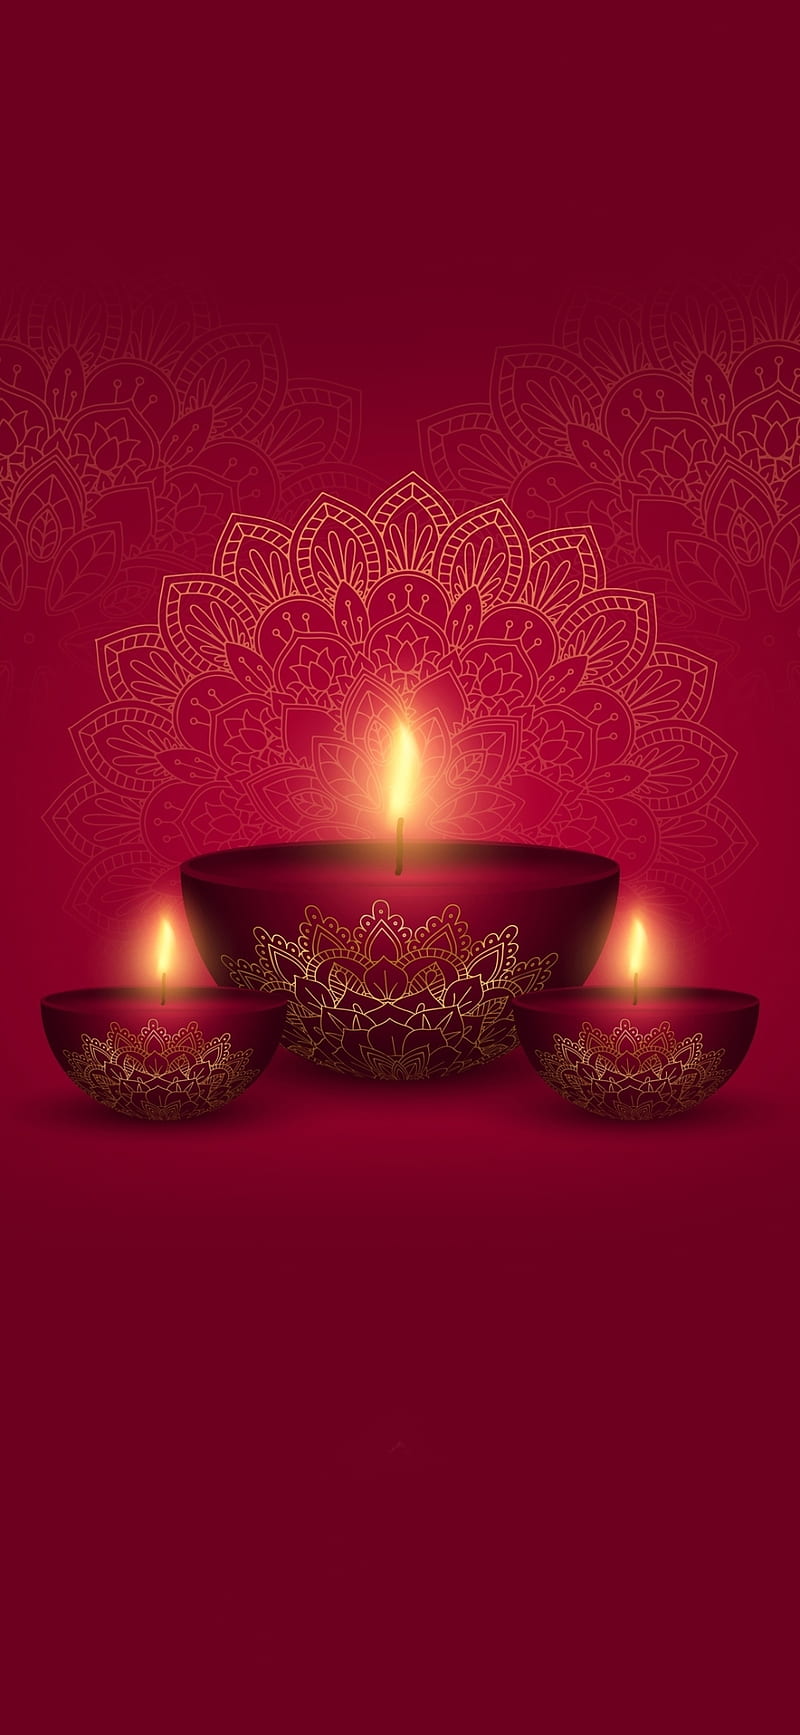 50 Diwali Background HD 2022 Free Stock Images  Download 